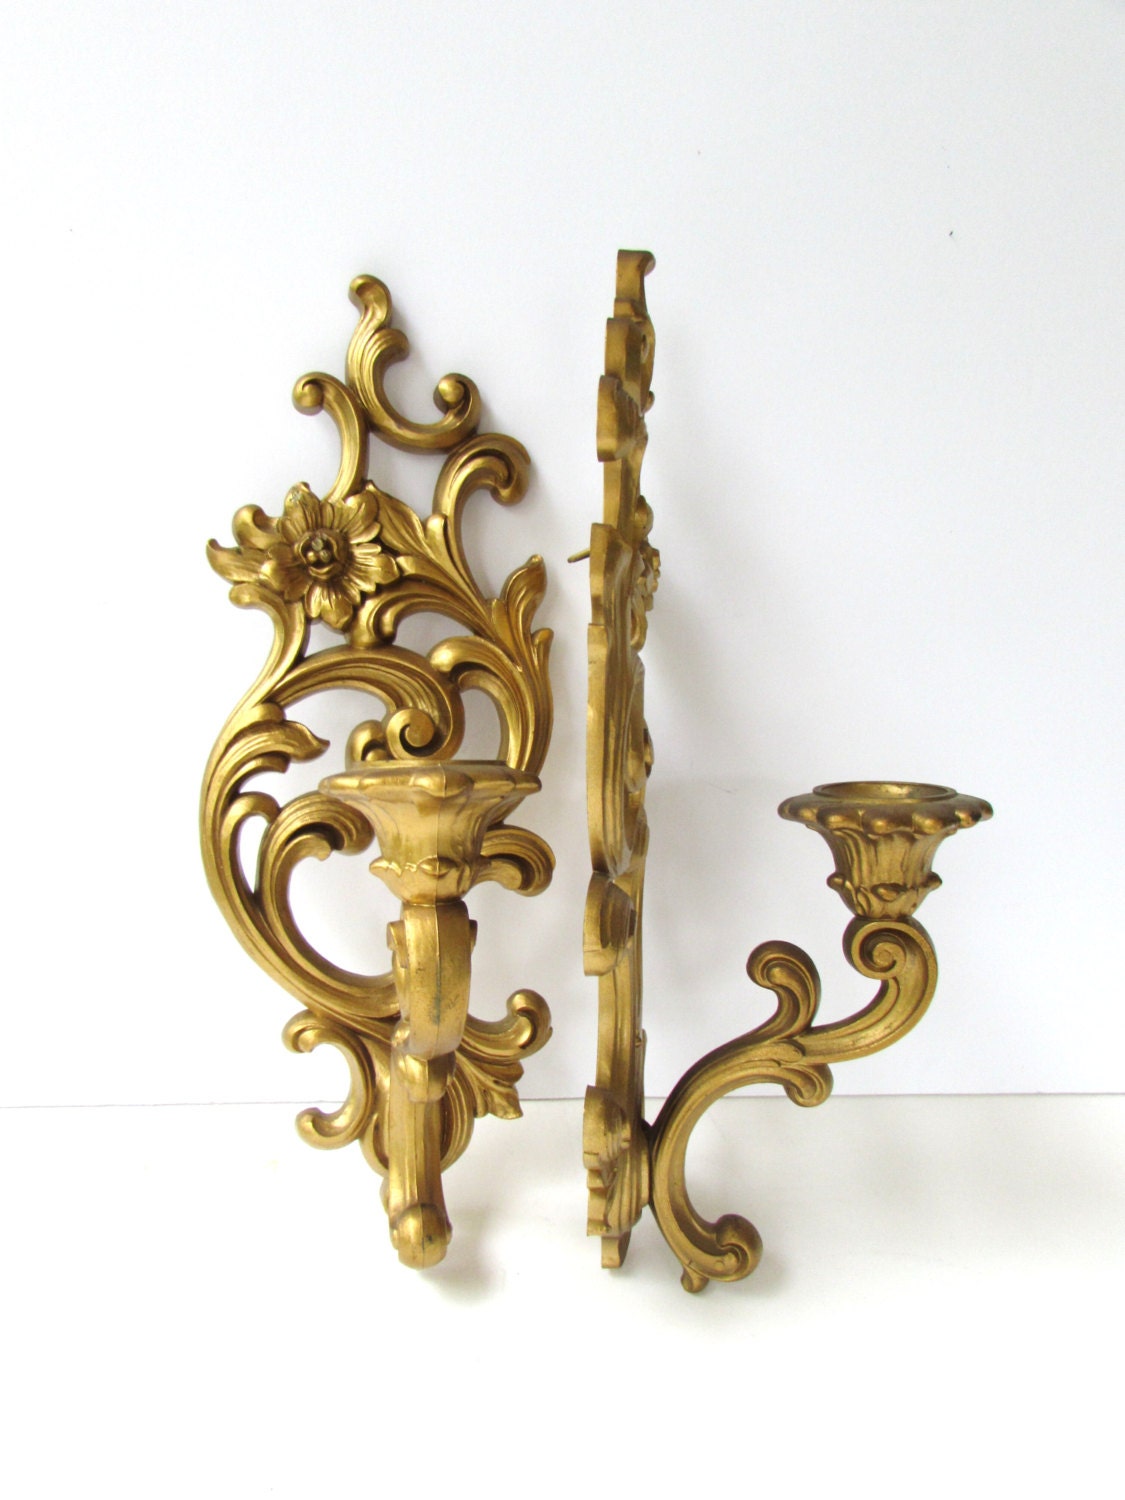 Pair of Vintage Wall Candle Sconces Resin Sconces Candle